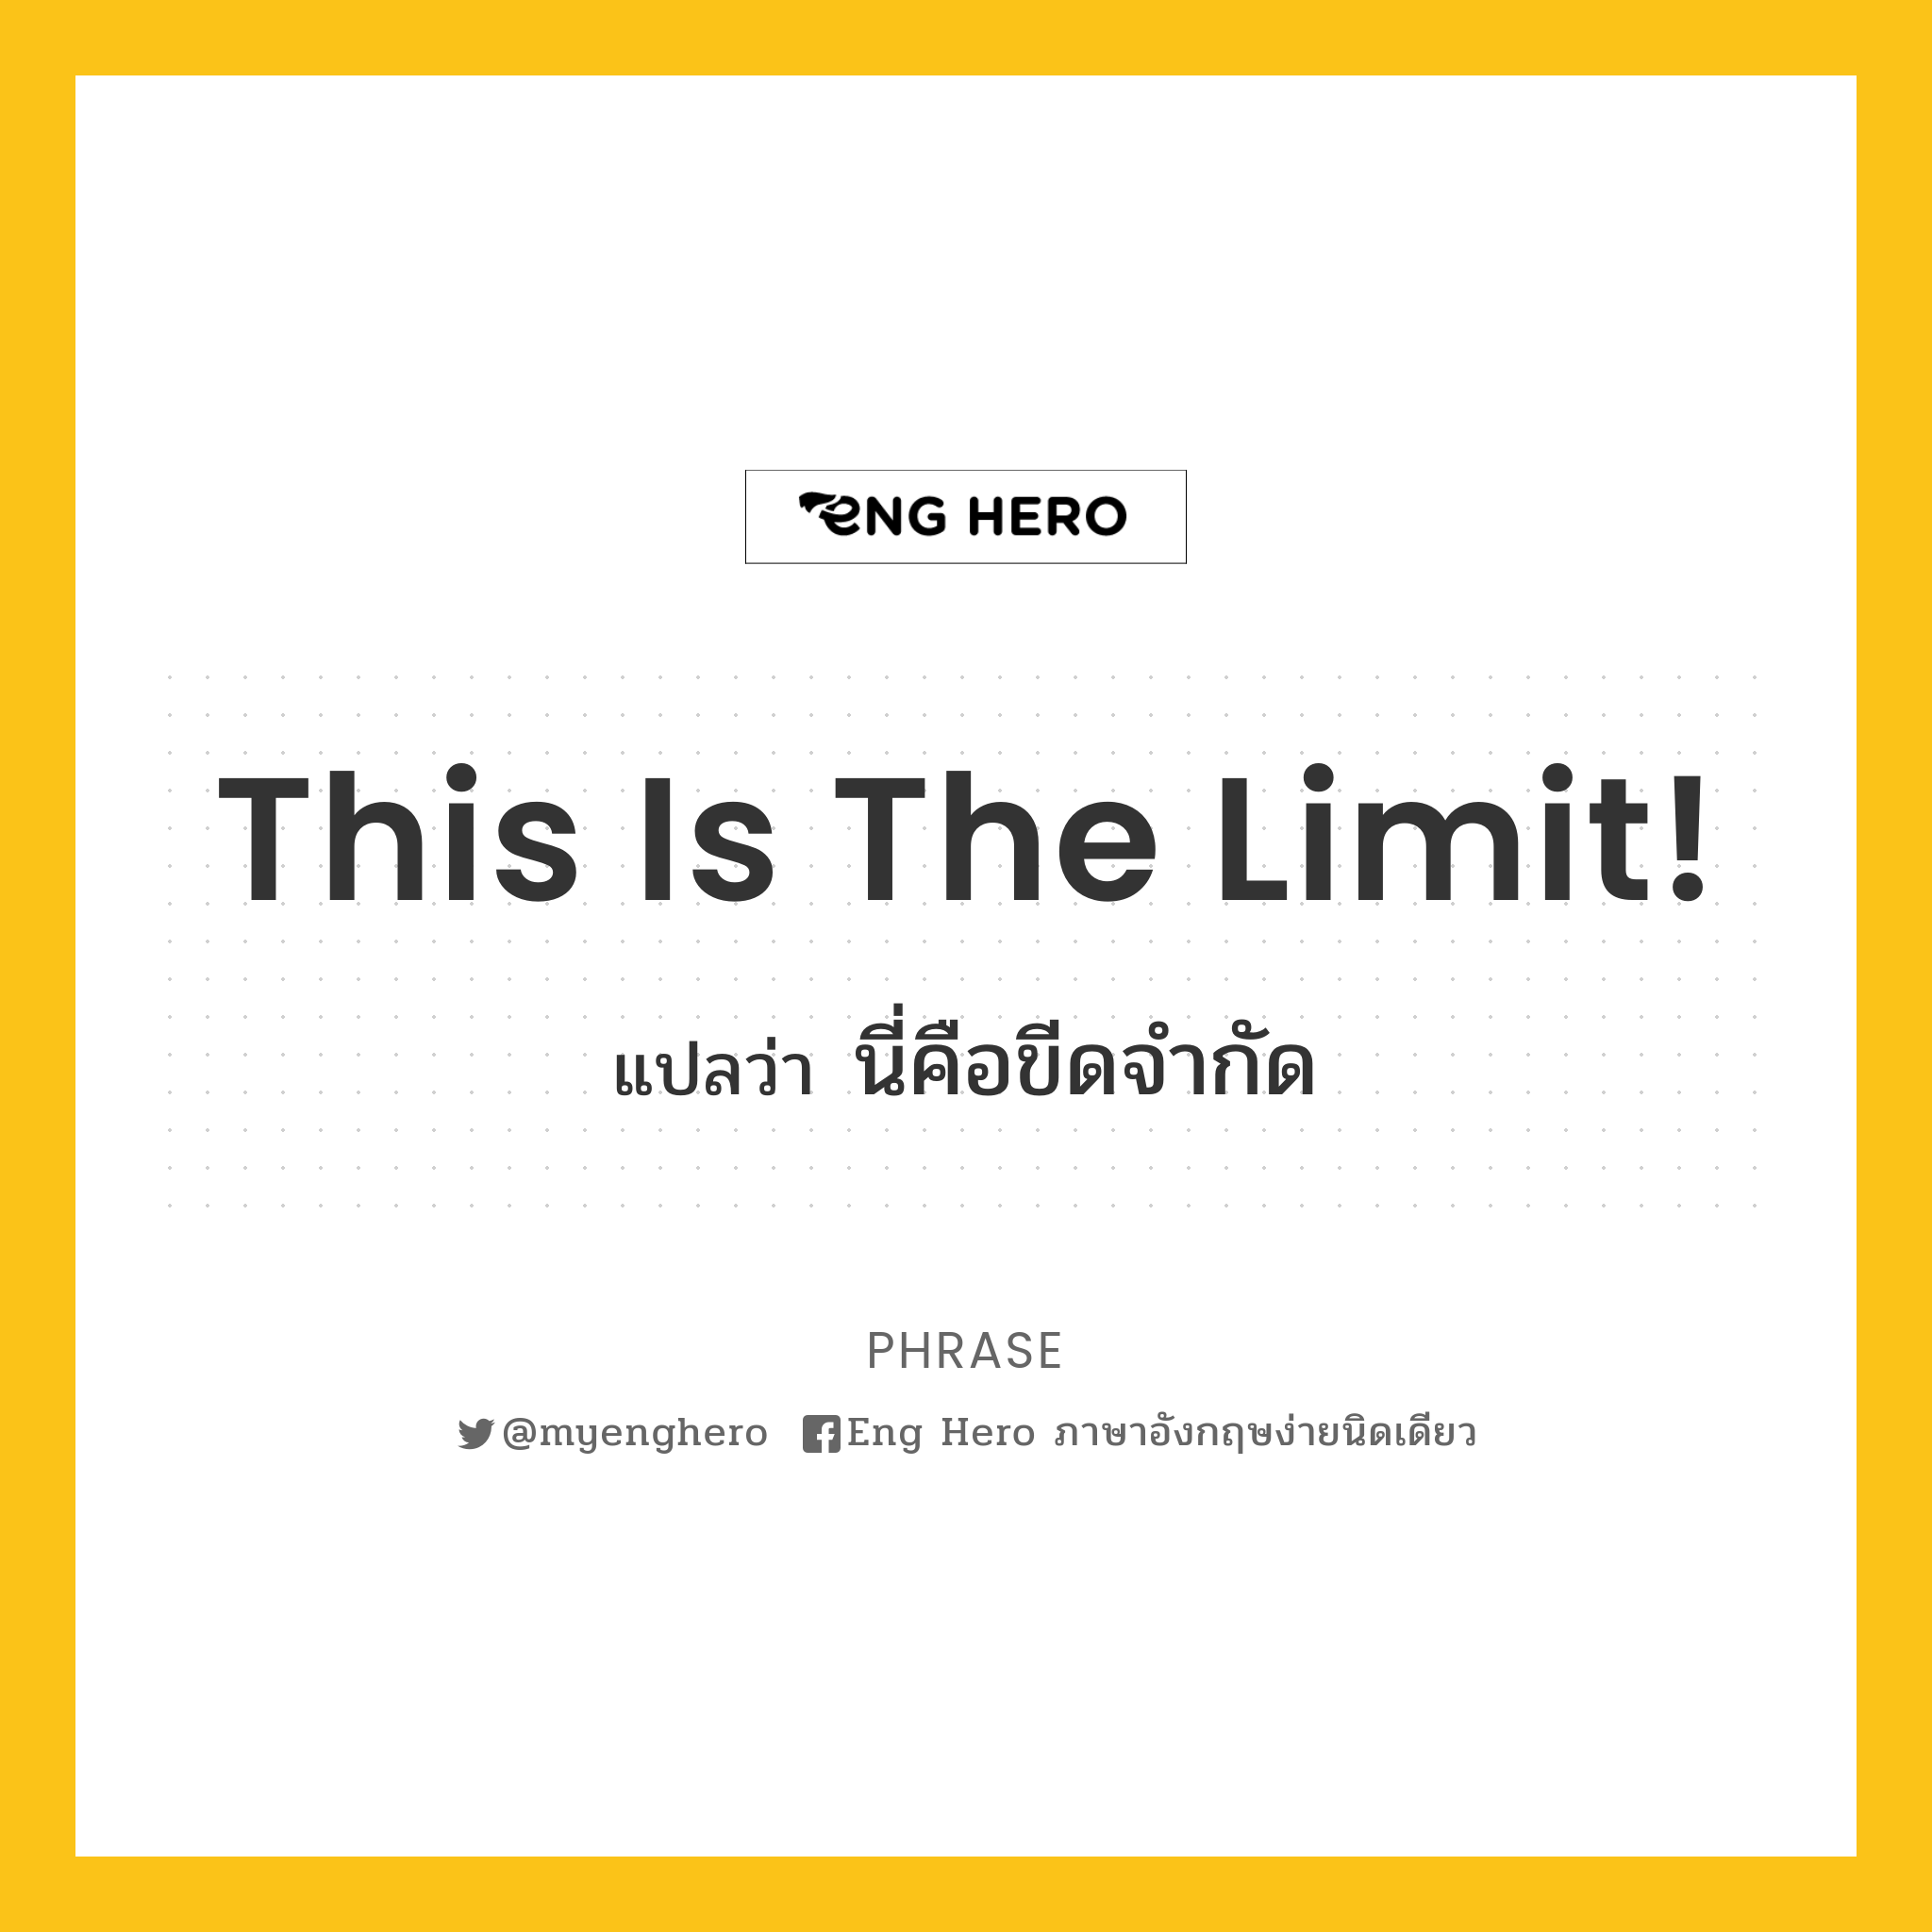 This is the limit!